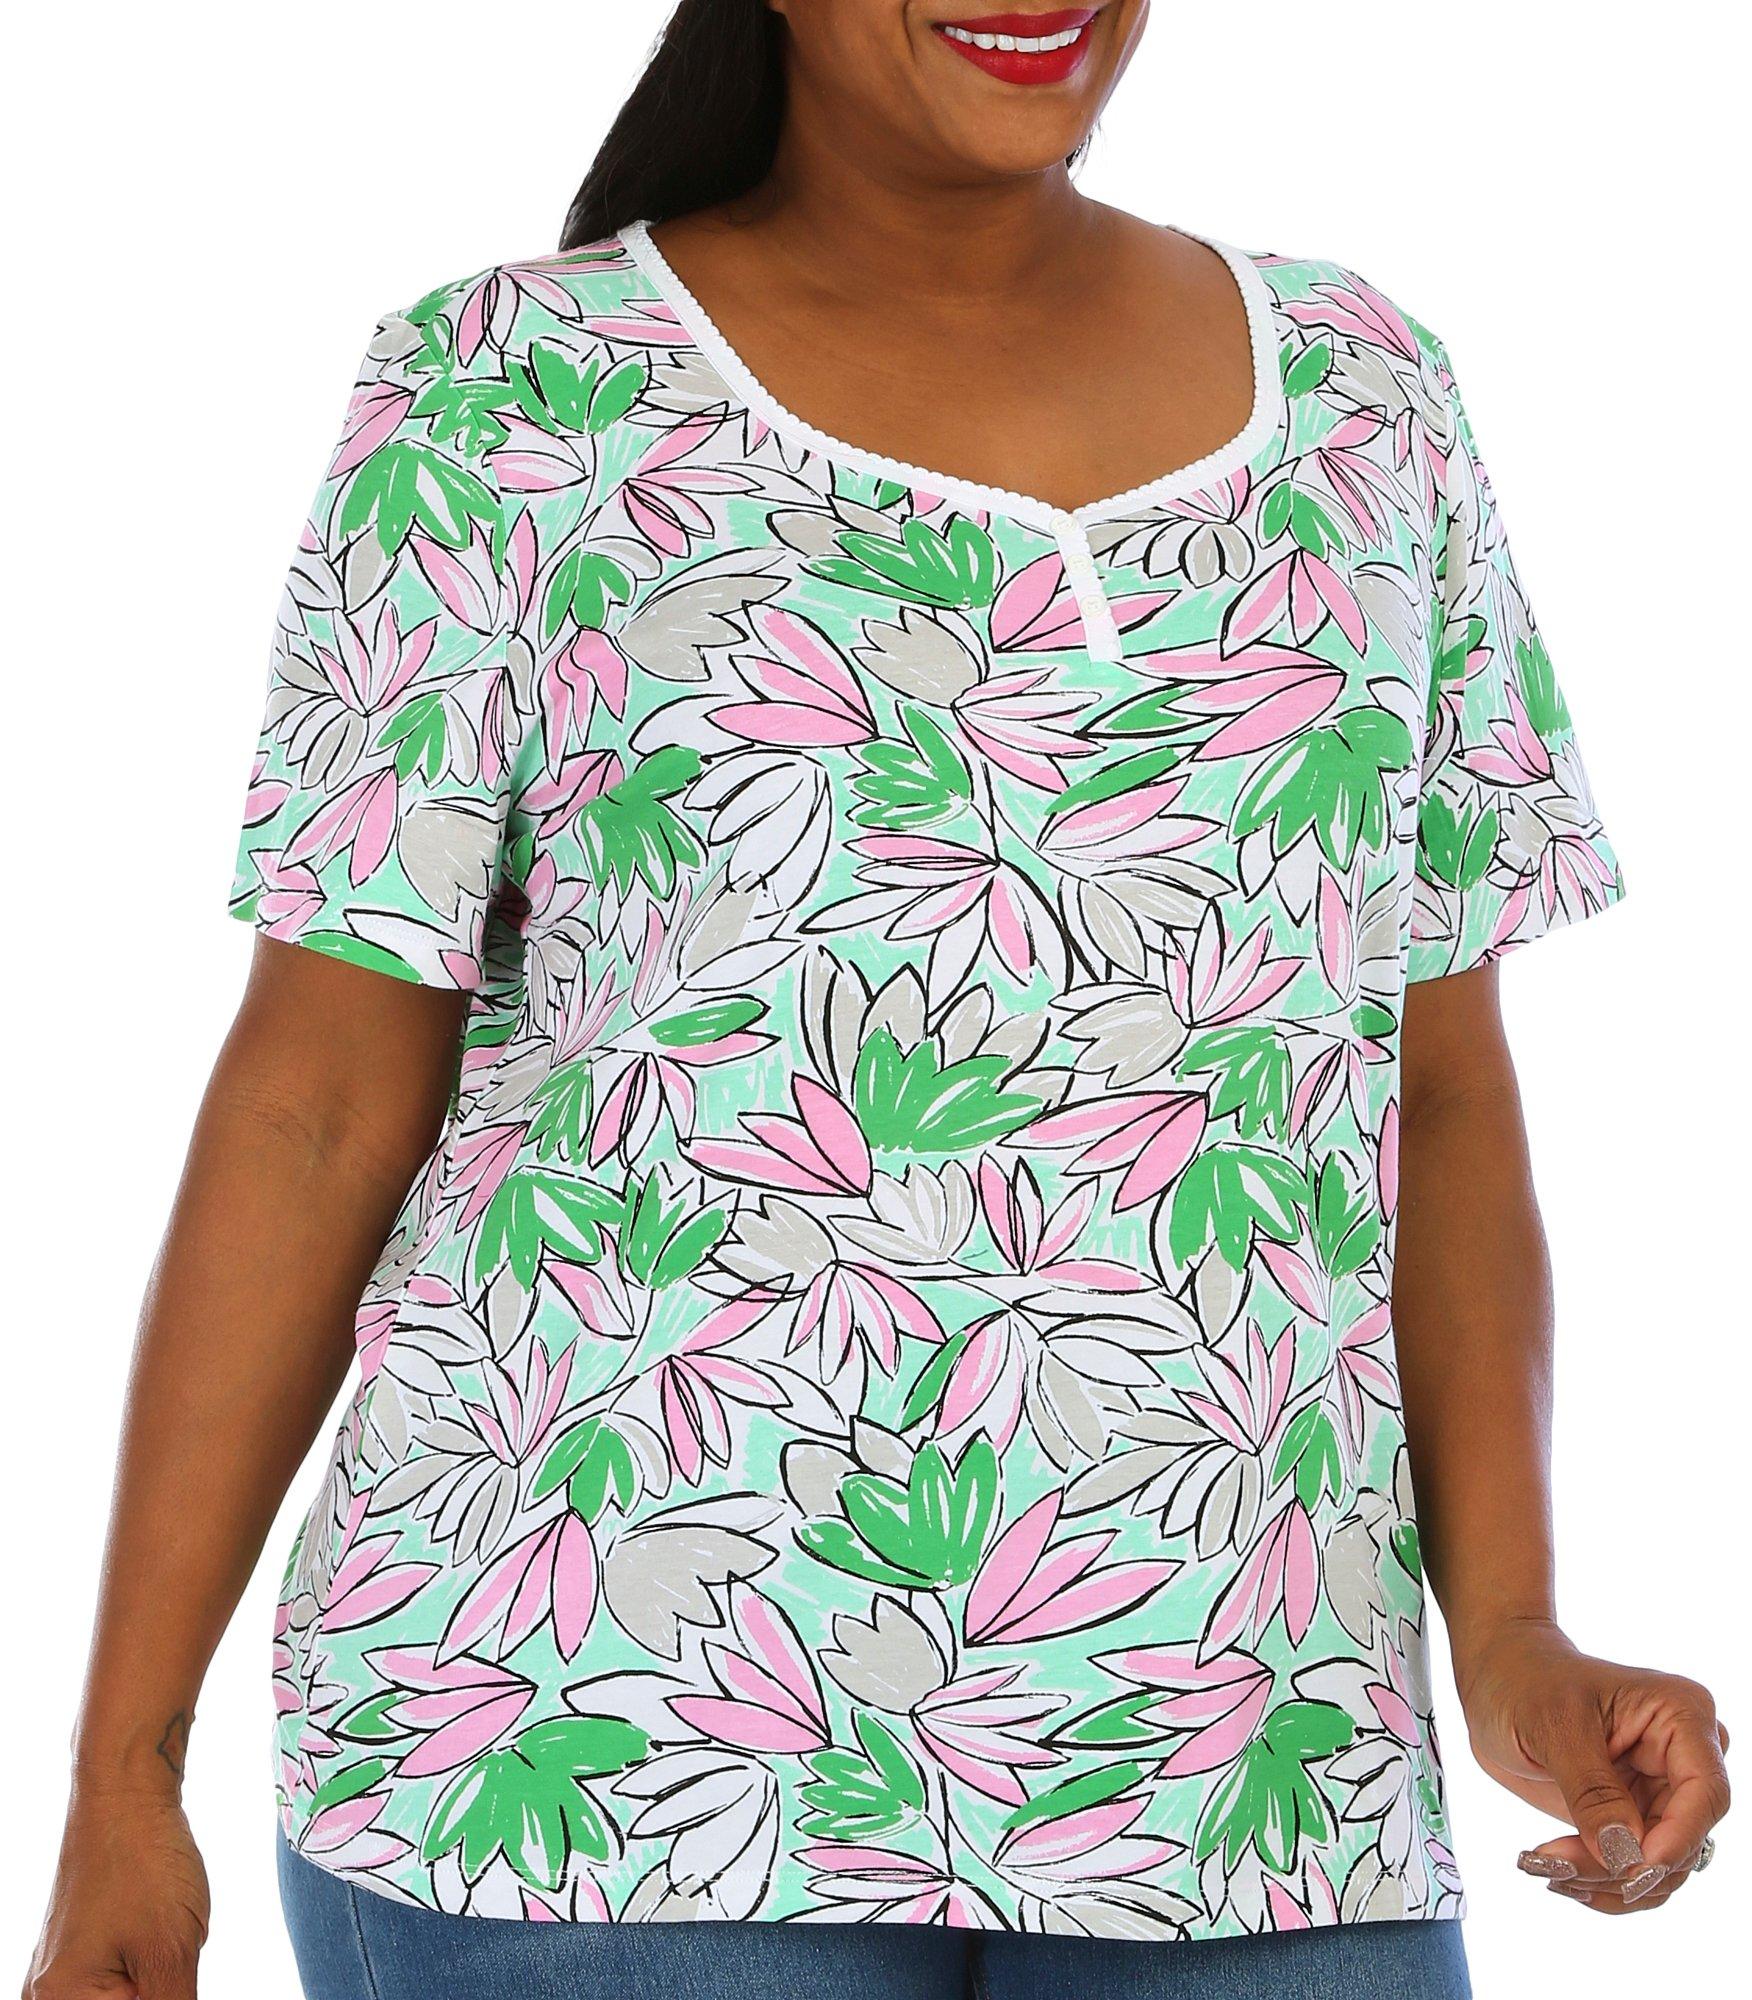 Coral Bay Plus Floral Print Henley Short Sleeve Top